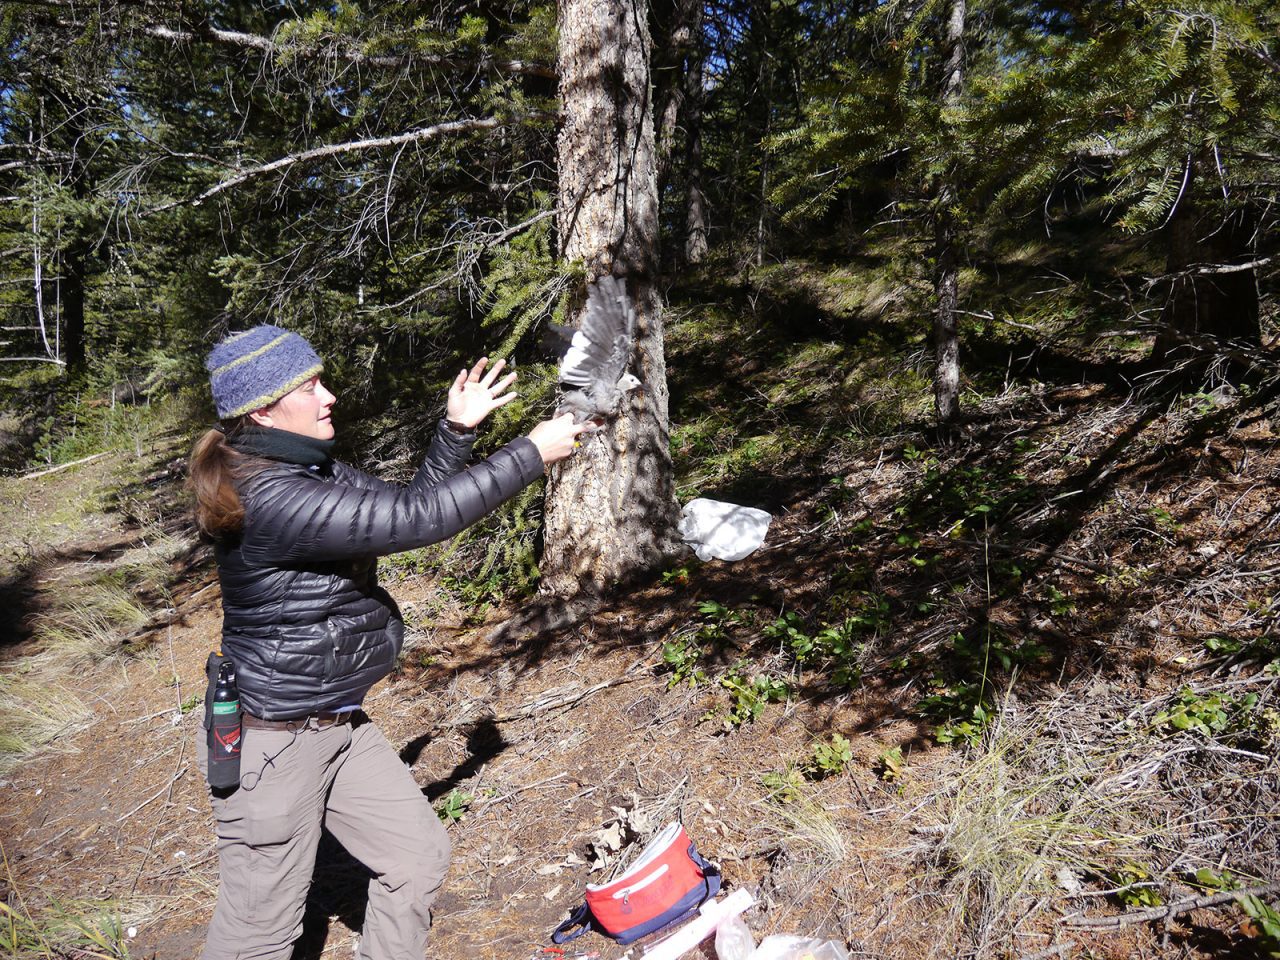 Schaming releases a bird with $3,500 of high-tech equipment in his backpack that will help answer unknown questions, such as whether nutcrackers can track whitebark pine cone resources across long distances in a landscape.